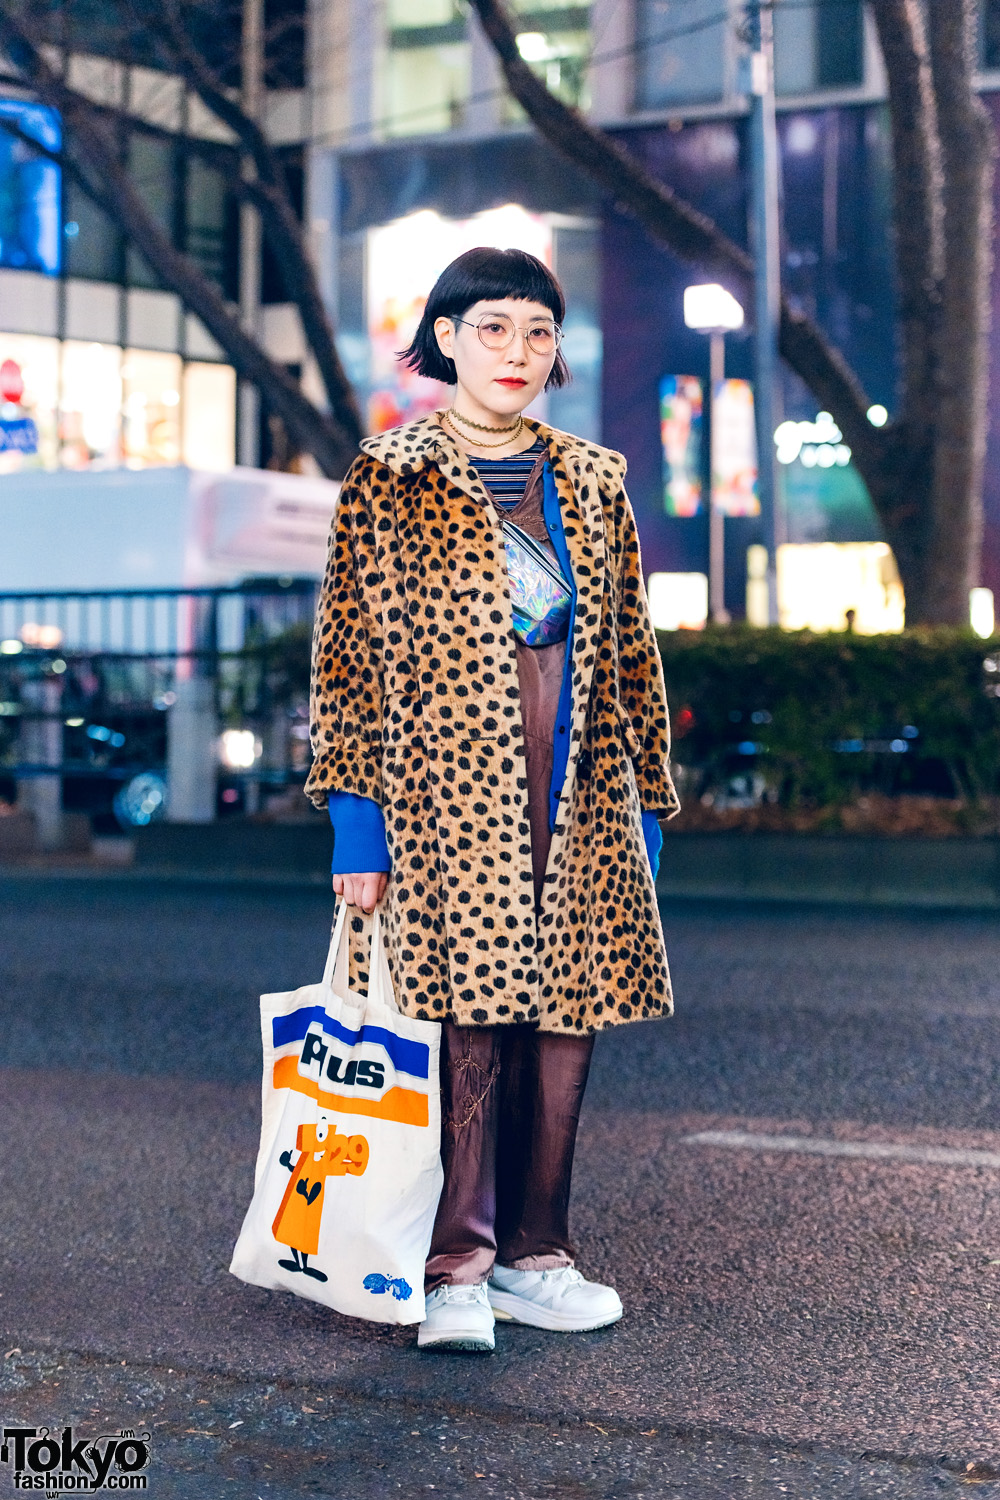 Japanese Accessory Artist in w/ Shiho Tabei Chokers, Leopard Print Coat, Jumpsuit, Canvas Tote, & Metallic Waist Bag